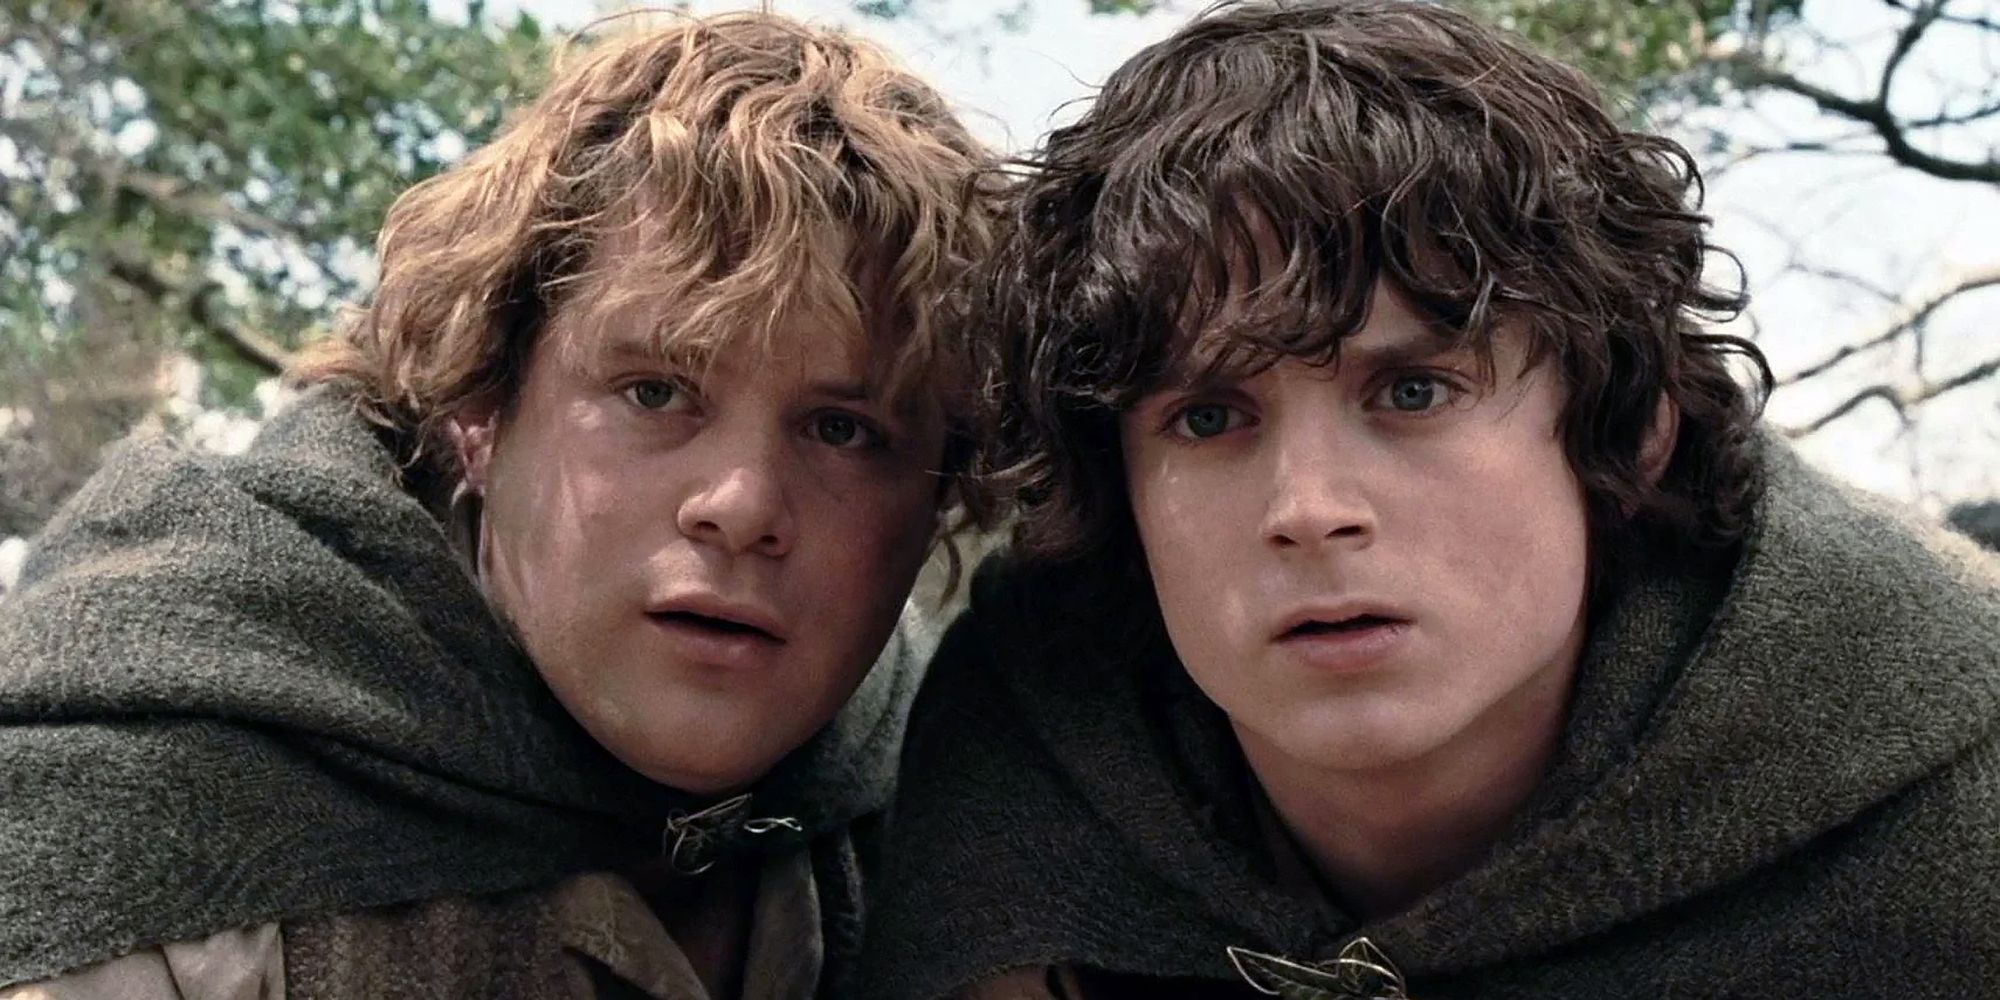 Samwise Gamgee (Sean Astin) was the real hero of 'The Lord of the Rings' trilogy